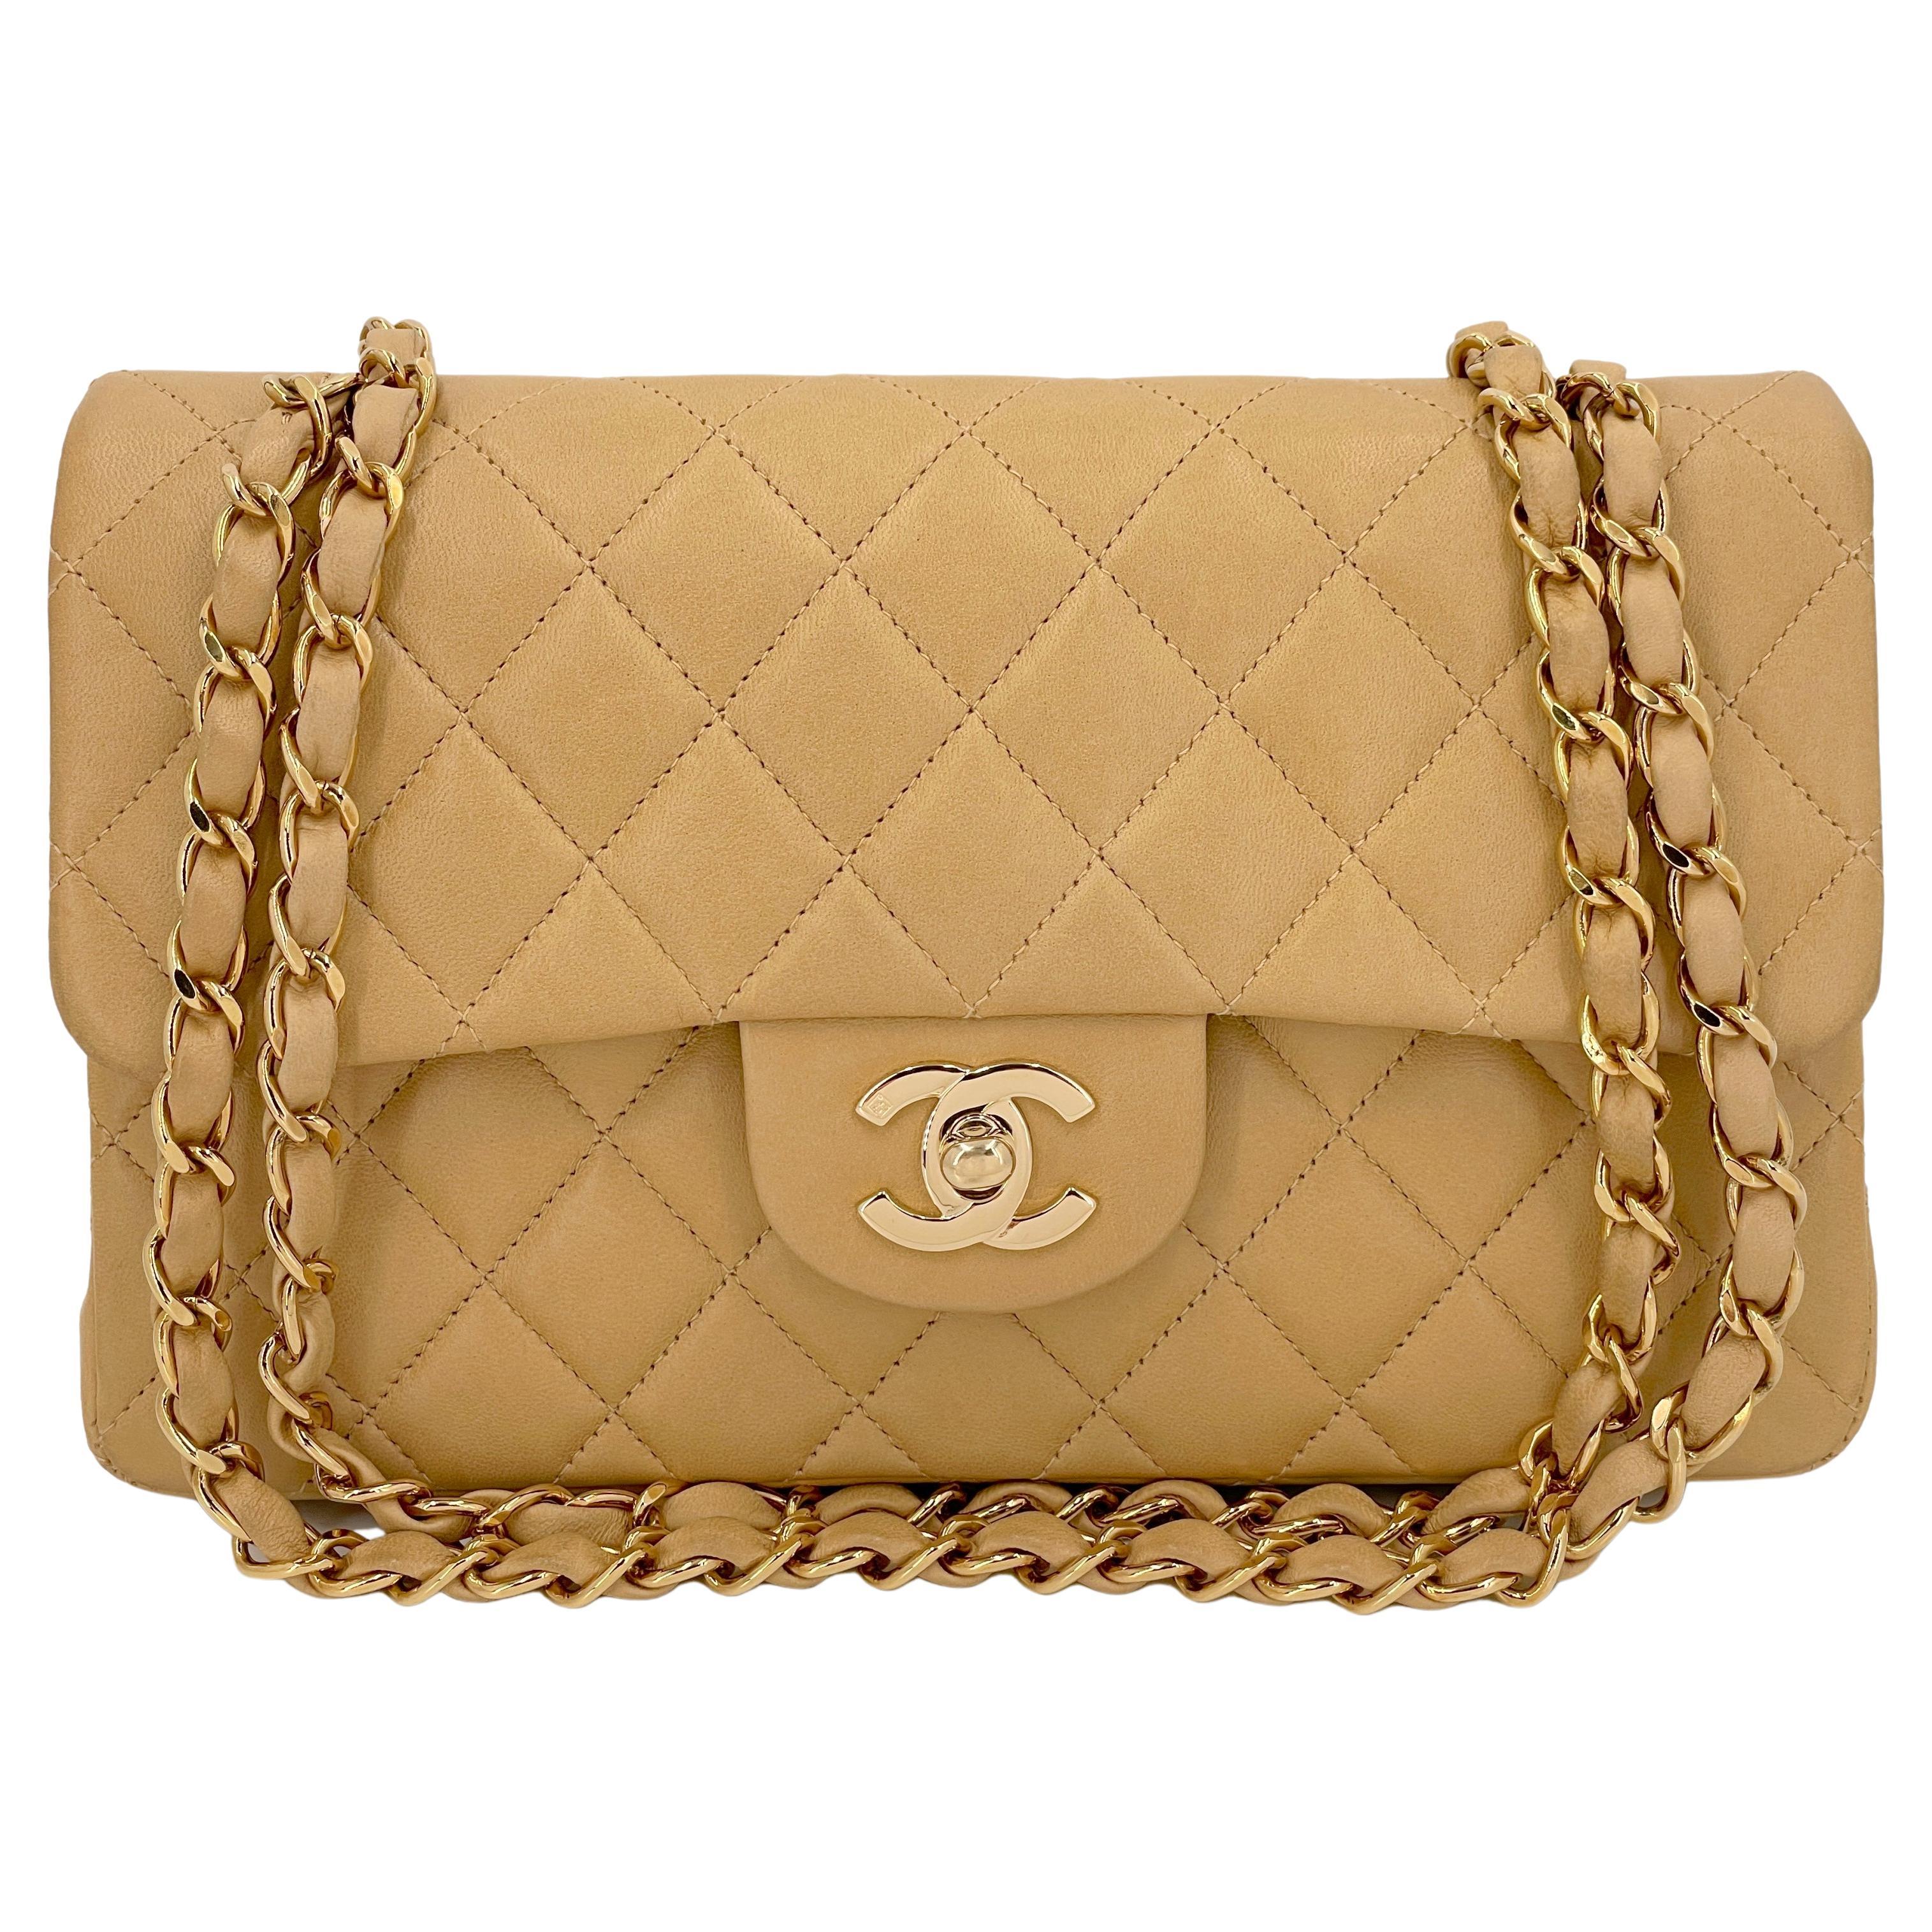 Chanel 2002 Vintage Small Classic Double Flap Bag